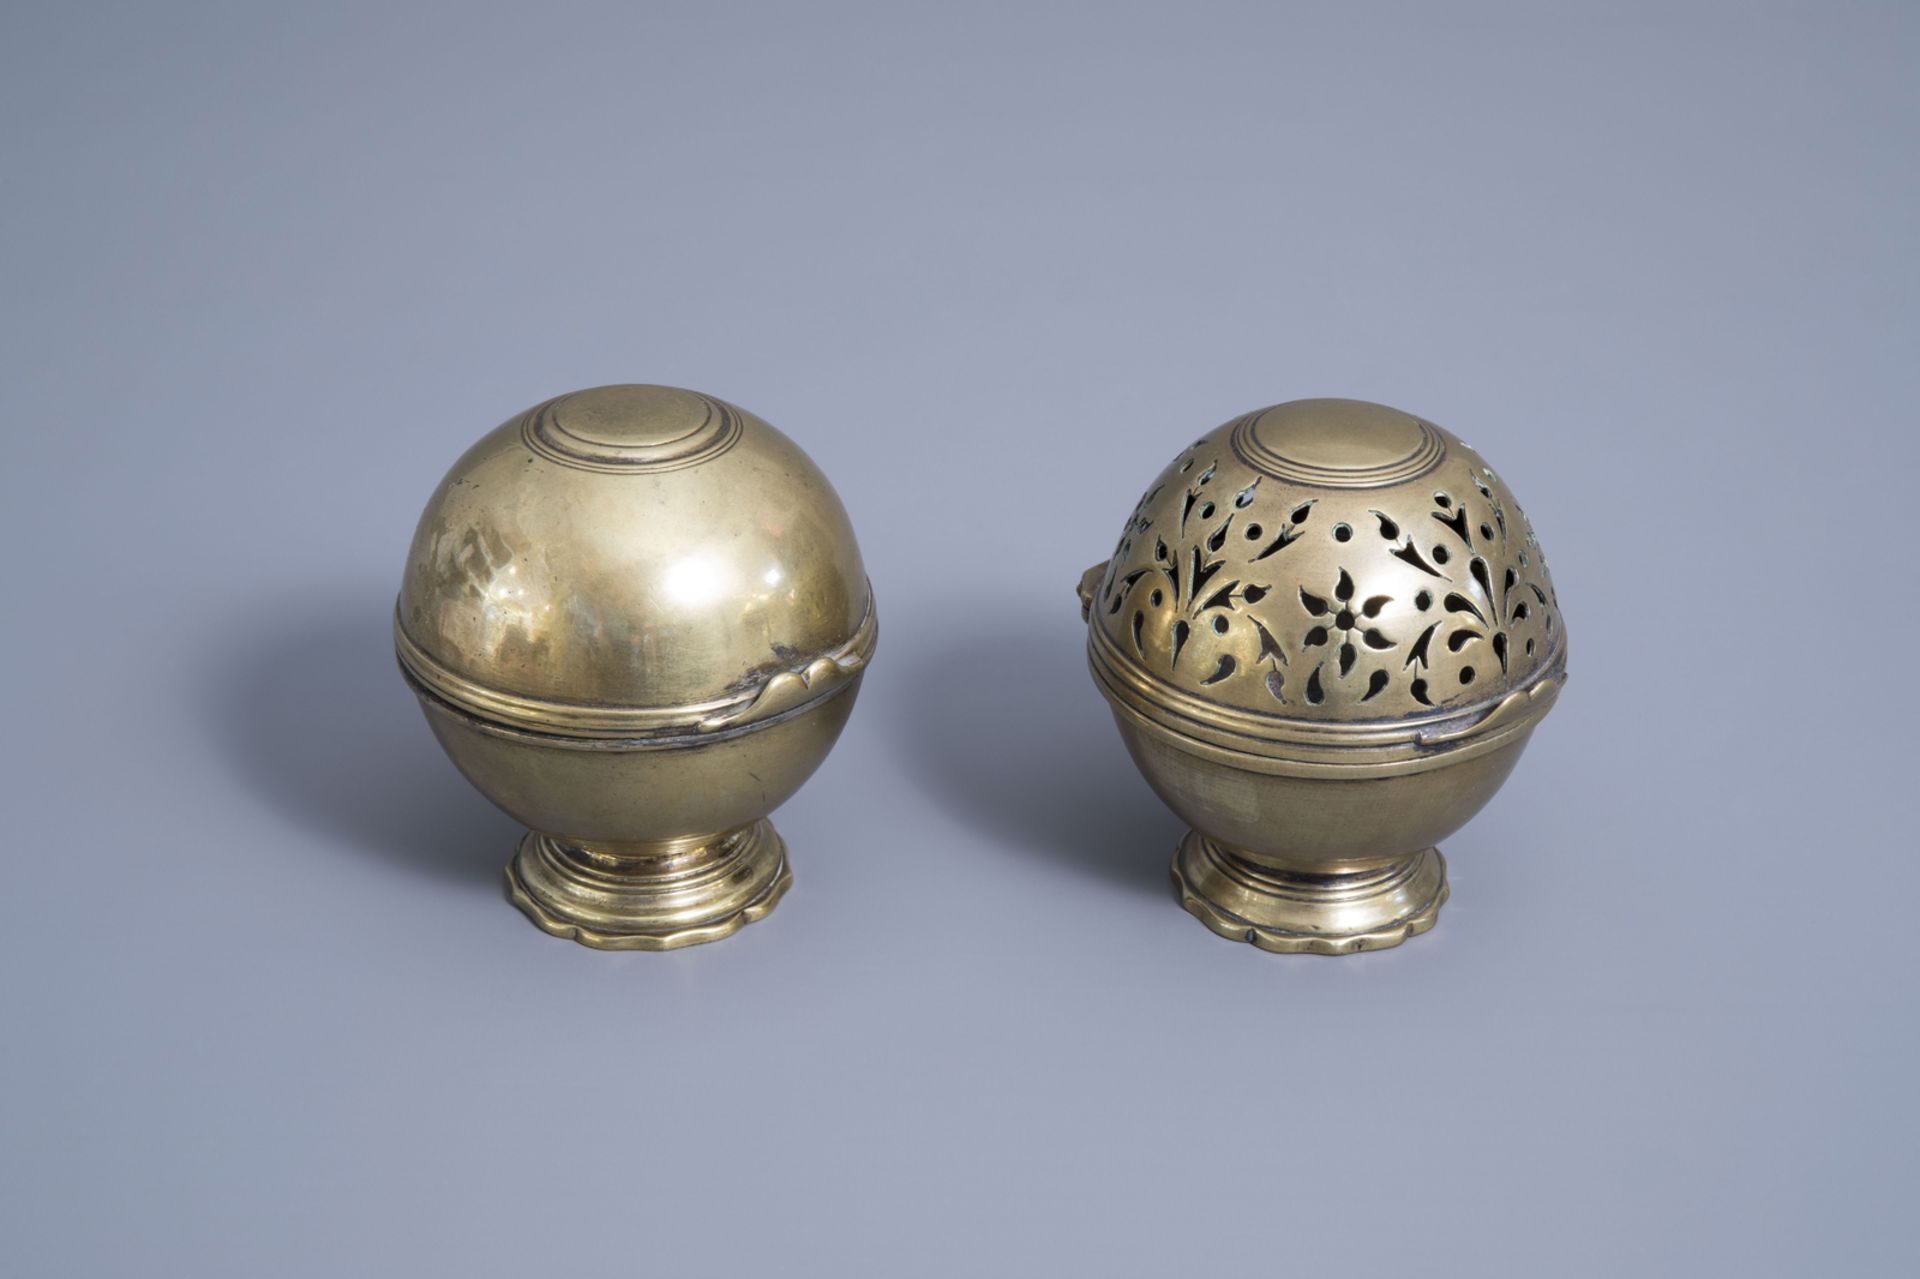 Two French Baroque sphere shaped hand warmers, ca. 1700